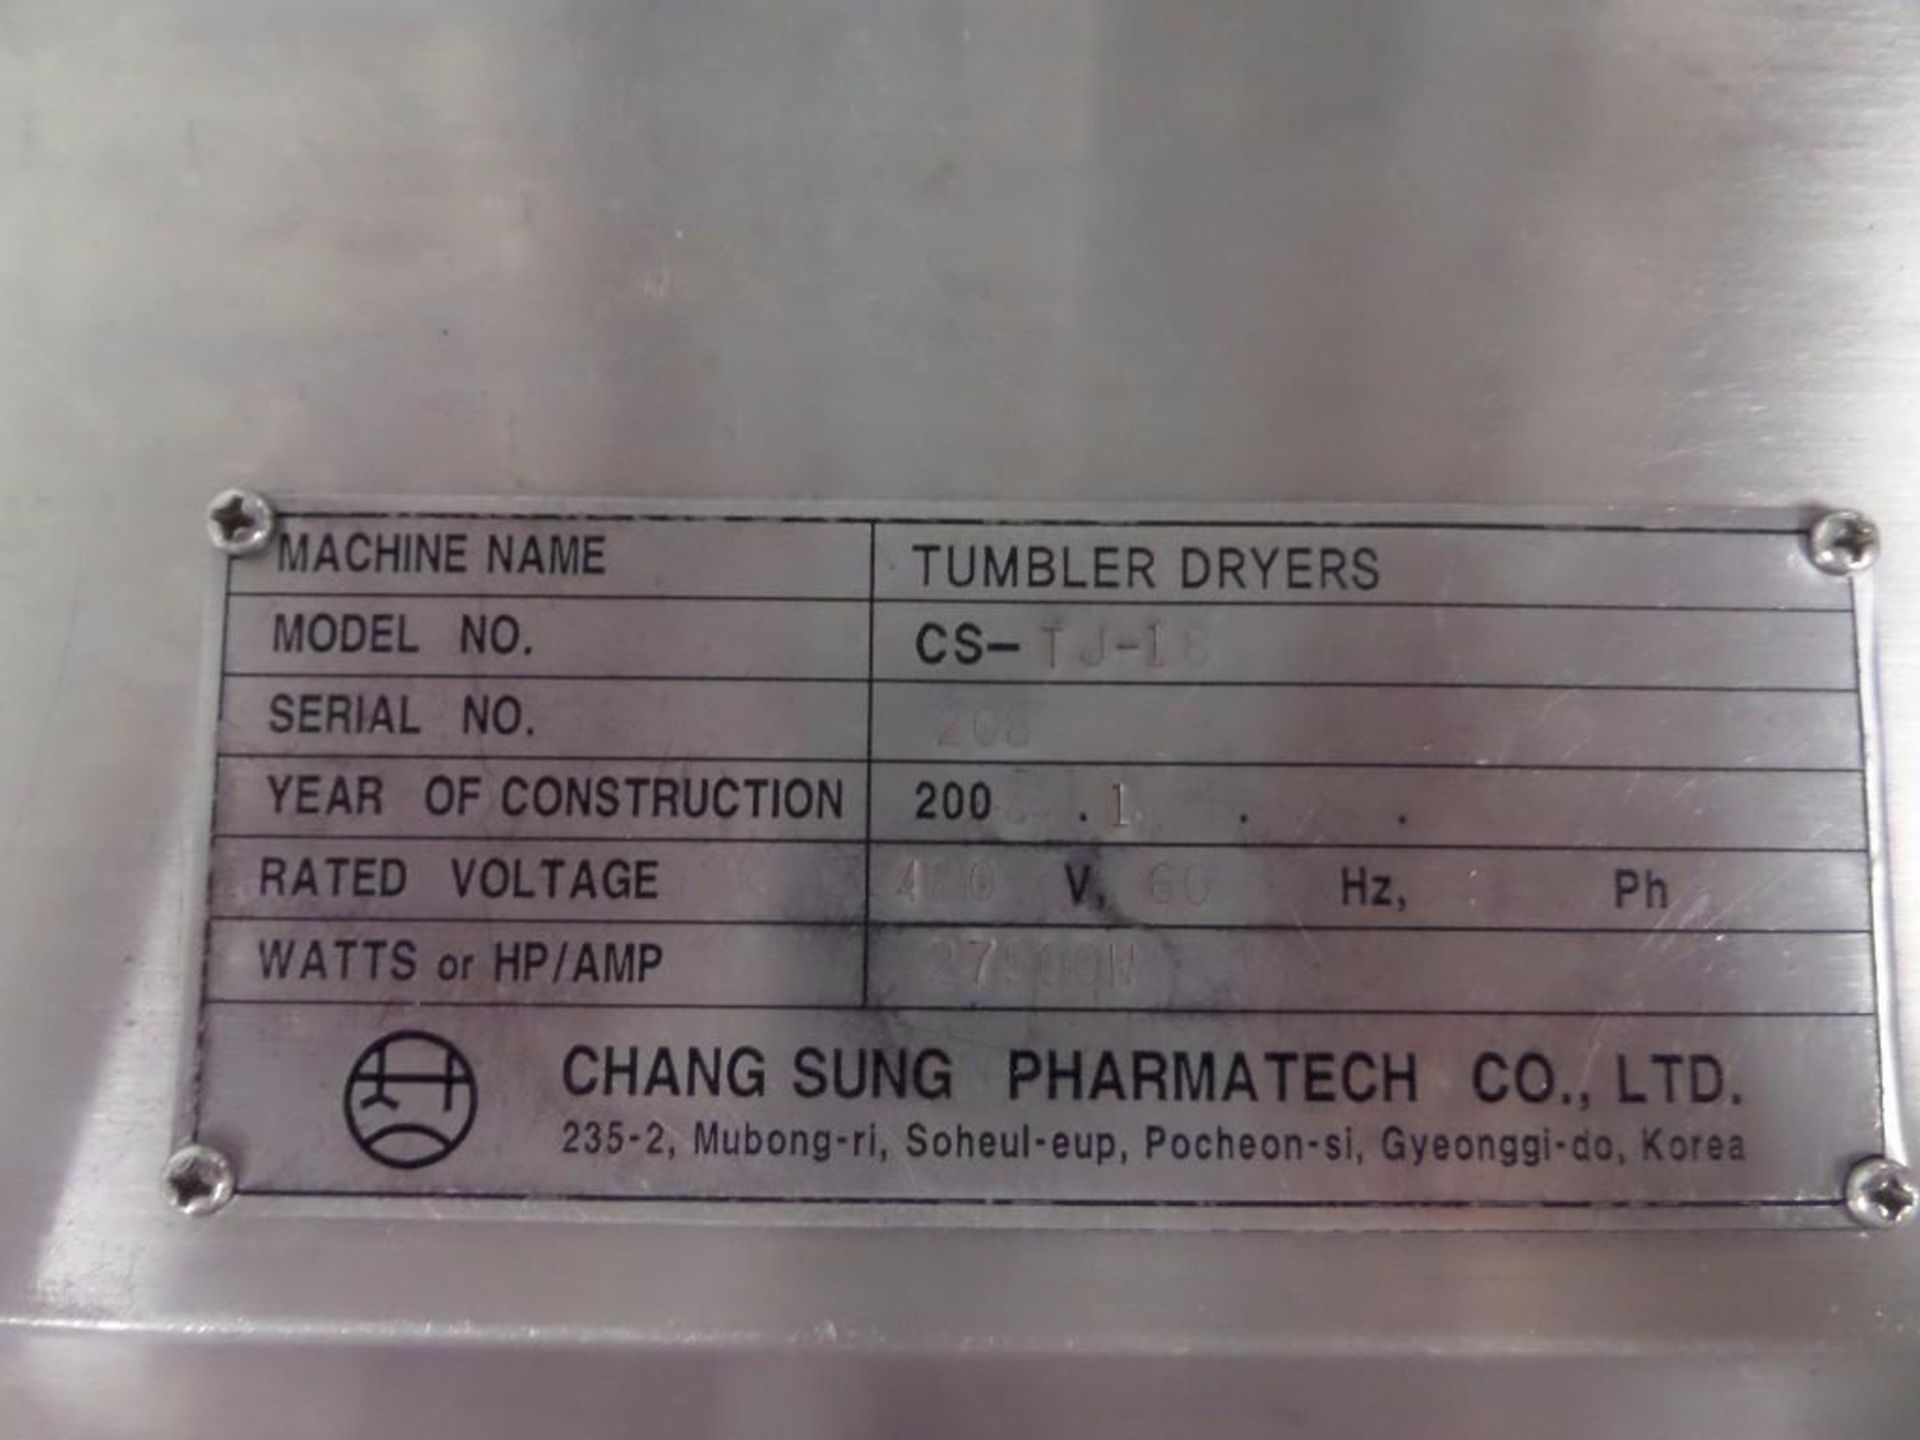 8 Used Continuous Tumbler Dryers. Chang Sung. - Image 9 of 10